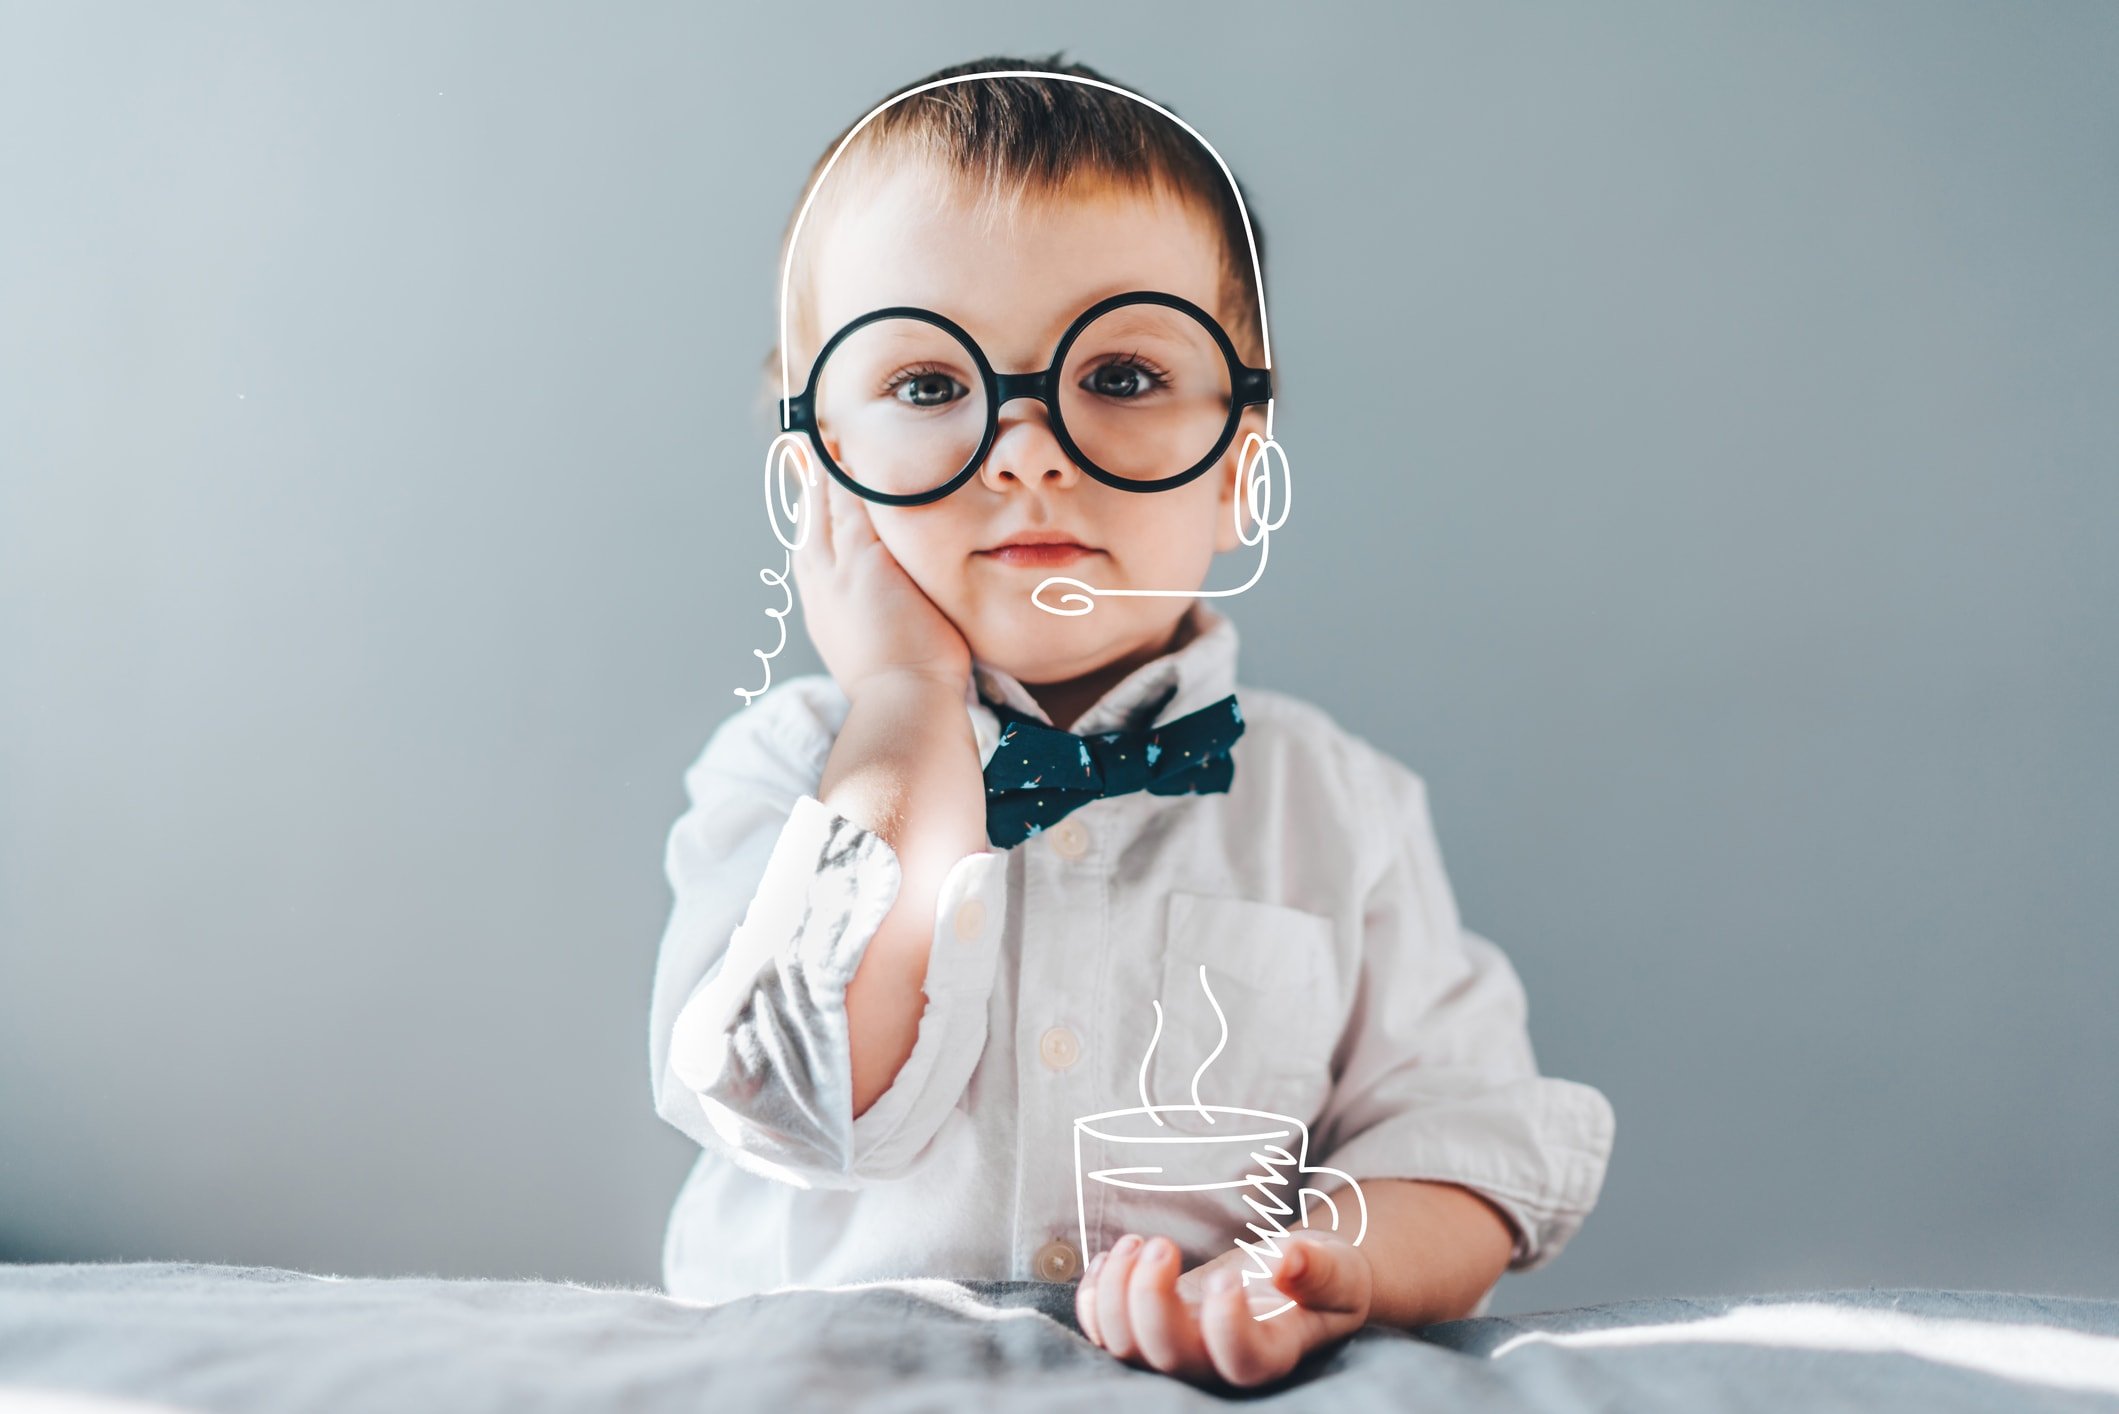 Cute little genius. Baby boy wearing smart outfit and eye glasses working as call center operator answering several people and drinking imaginary coffee.